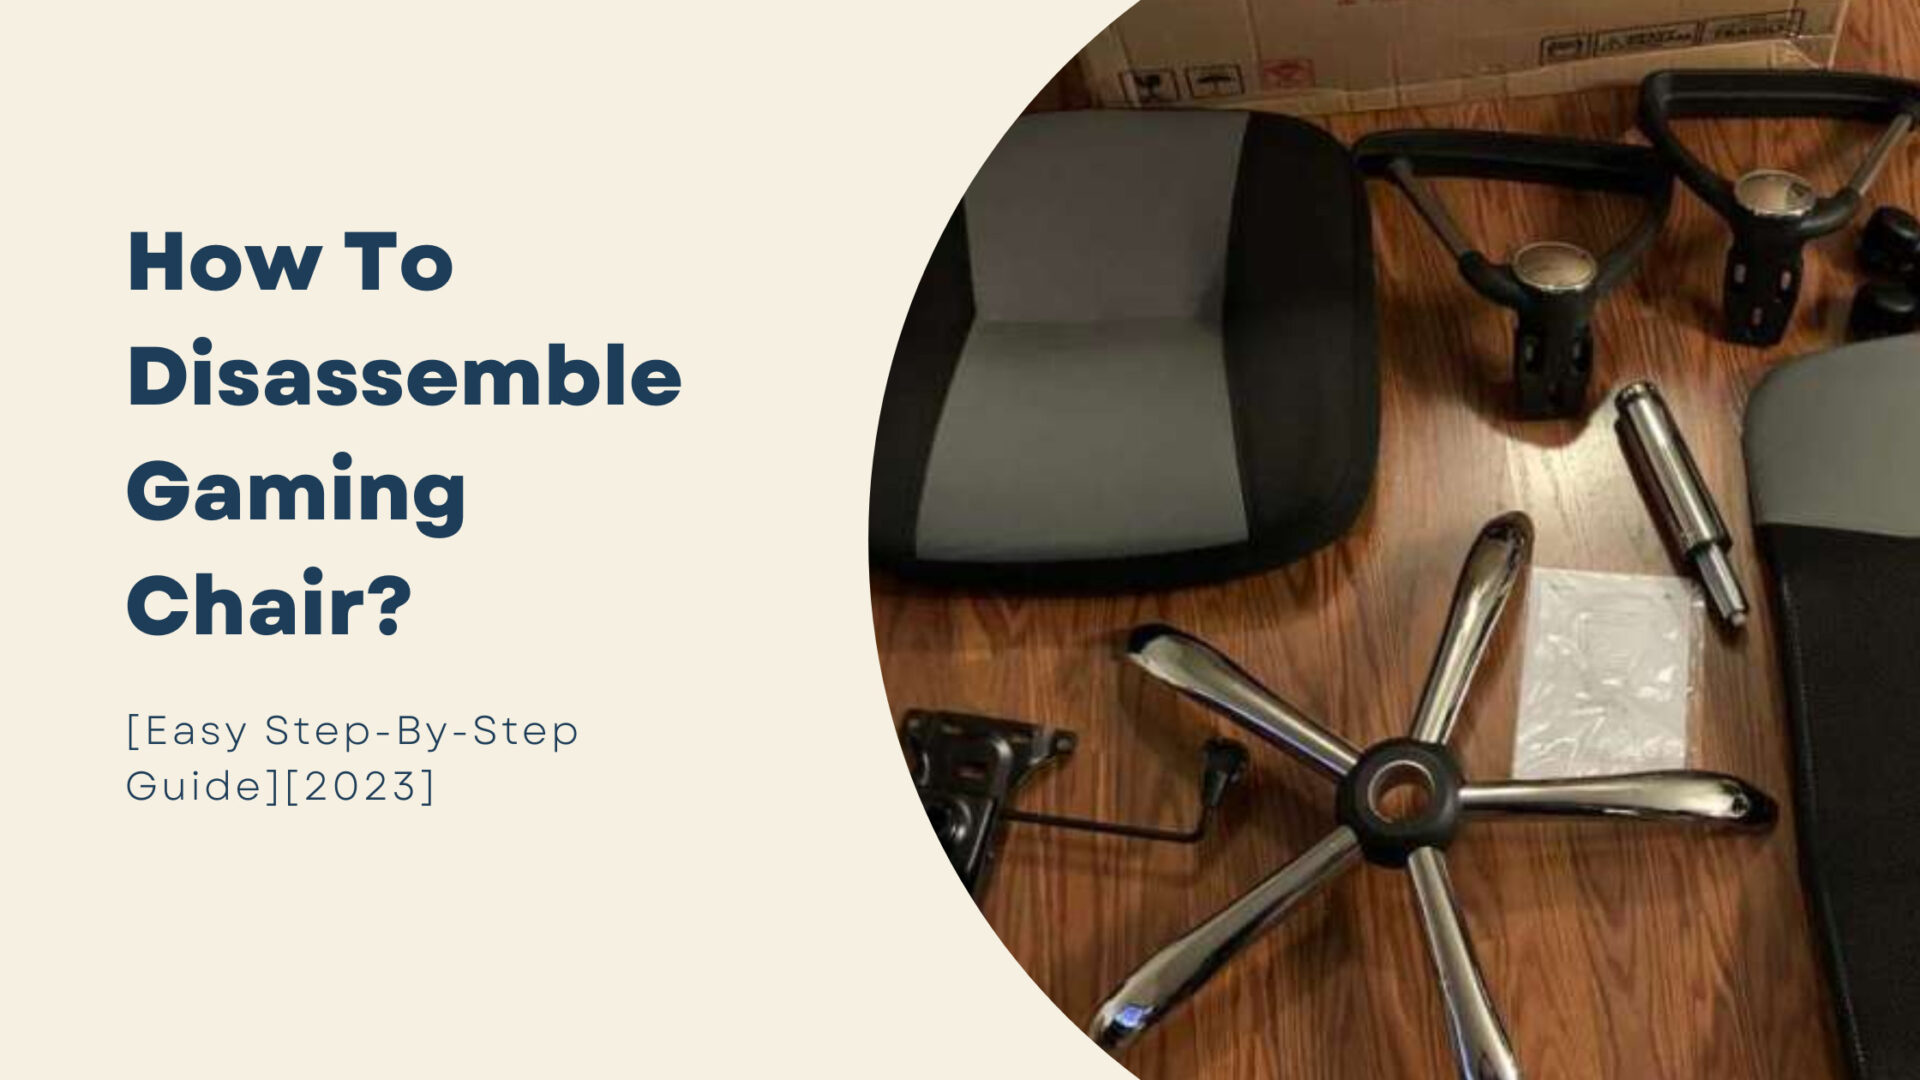 How To Disassemble Gaming Chair